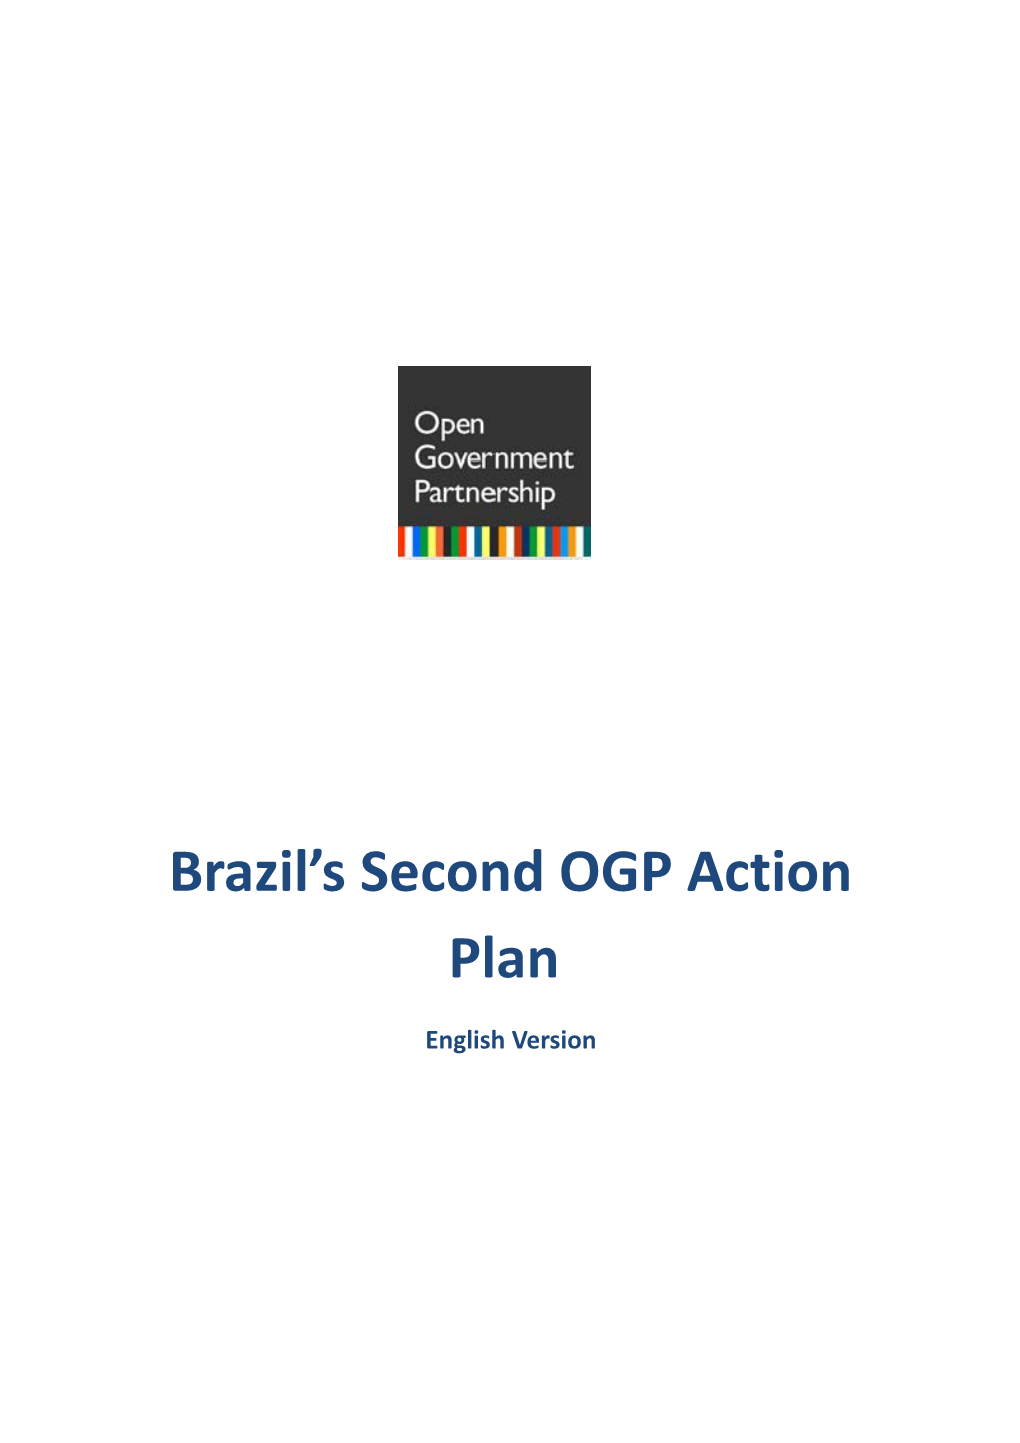 Brazil S Second Action Plan Within the Open Government Partnership